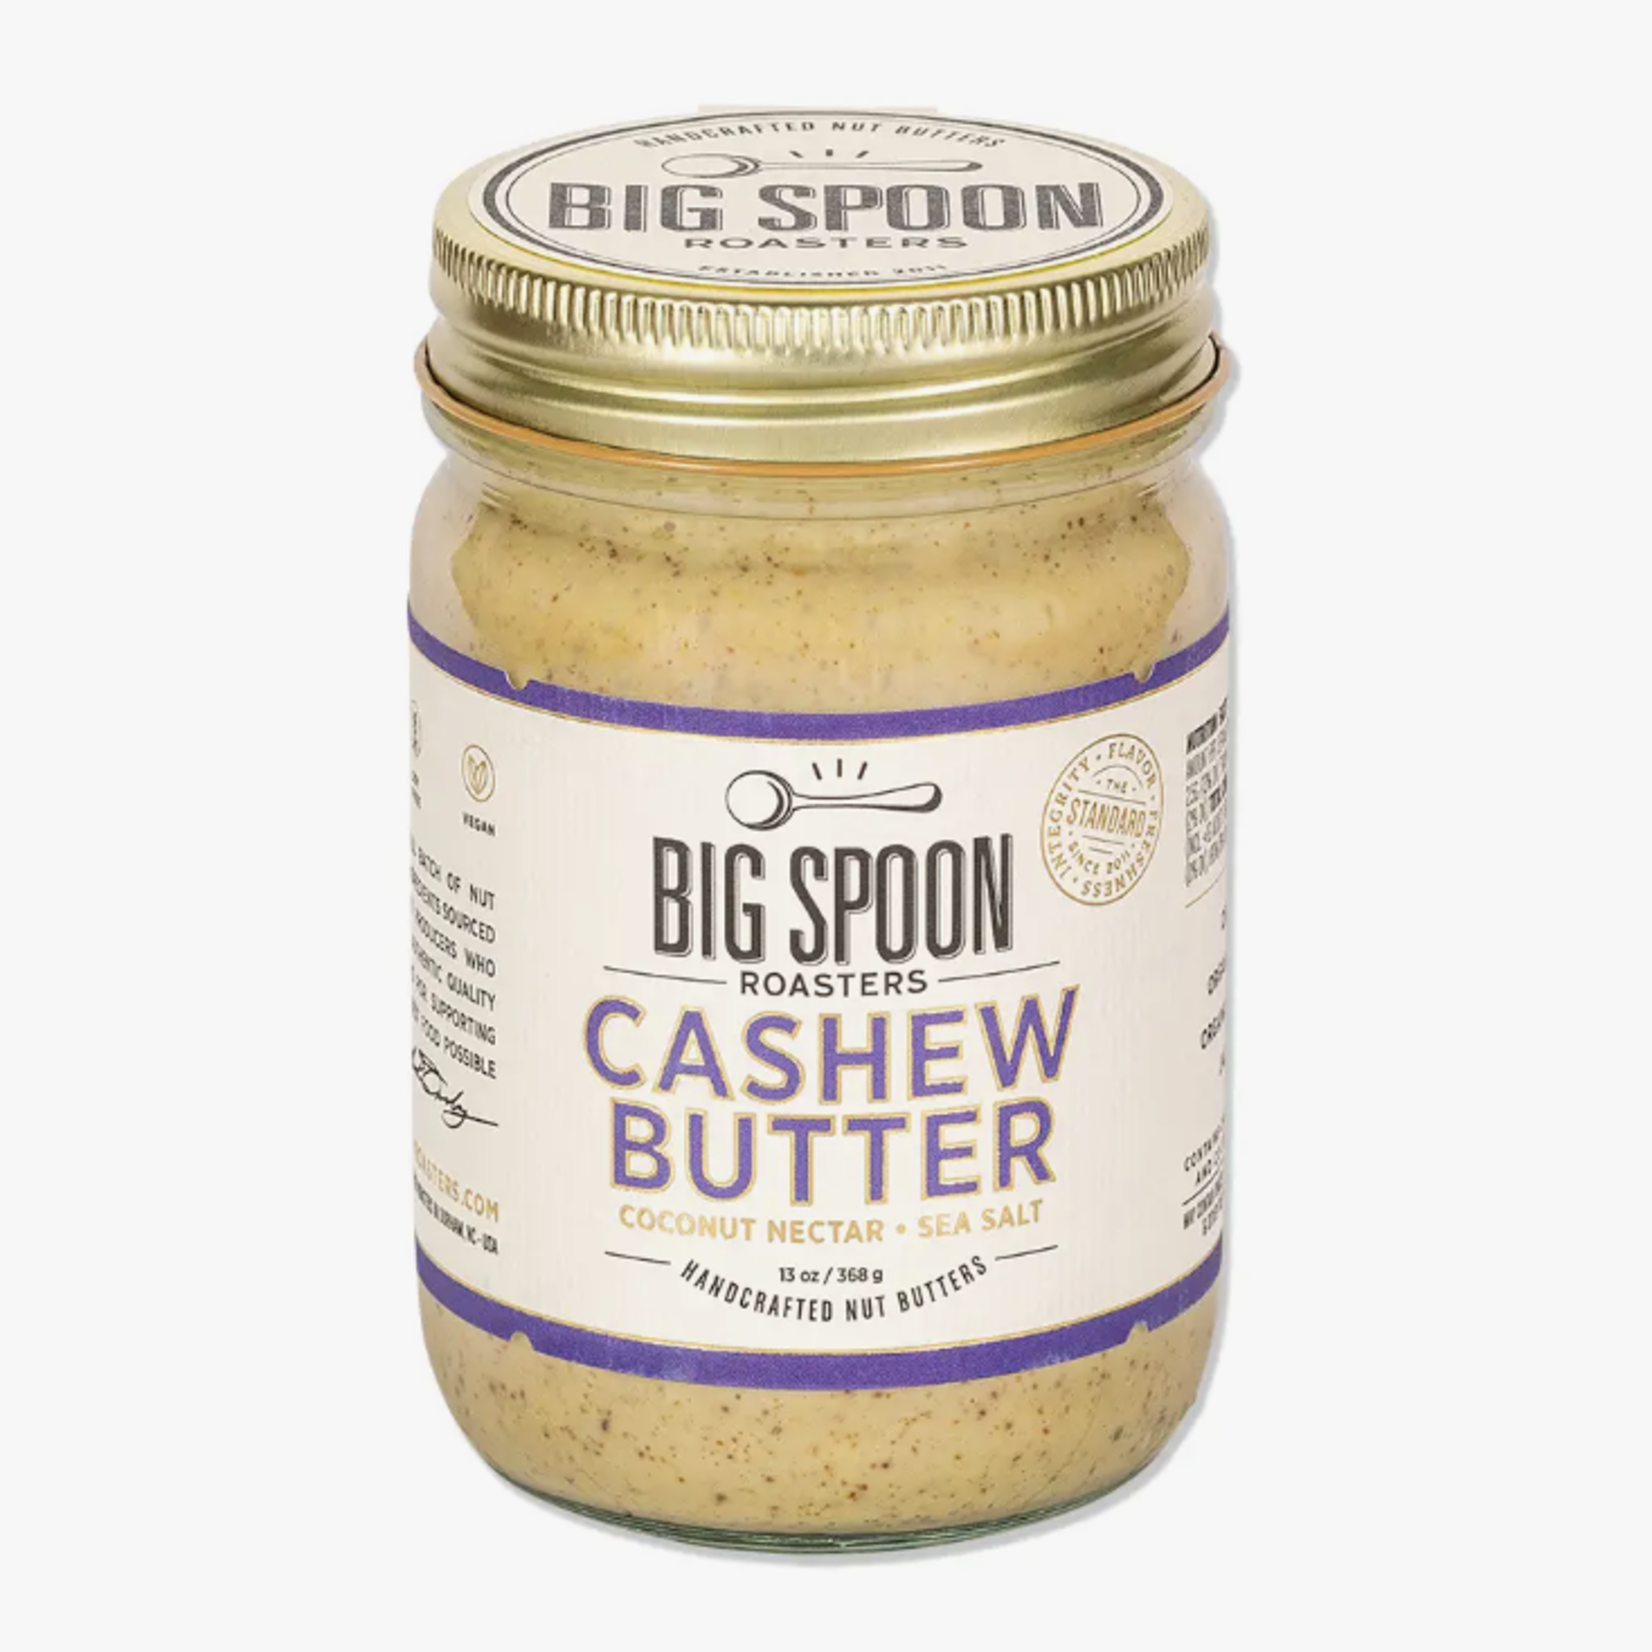 Big Spoon Roasters Cashew Butter with Coconut Nectar